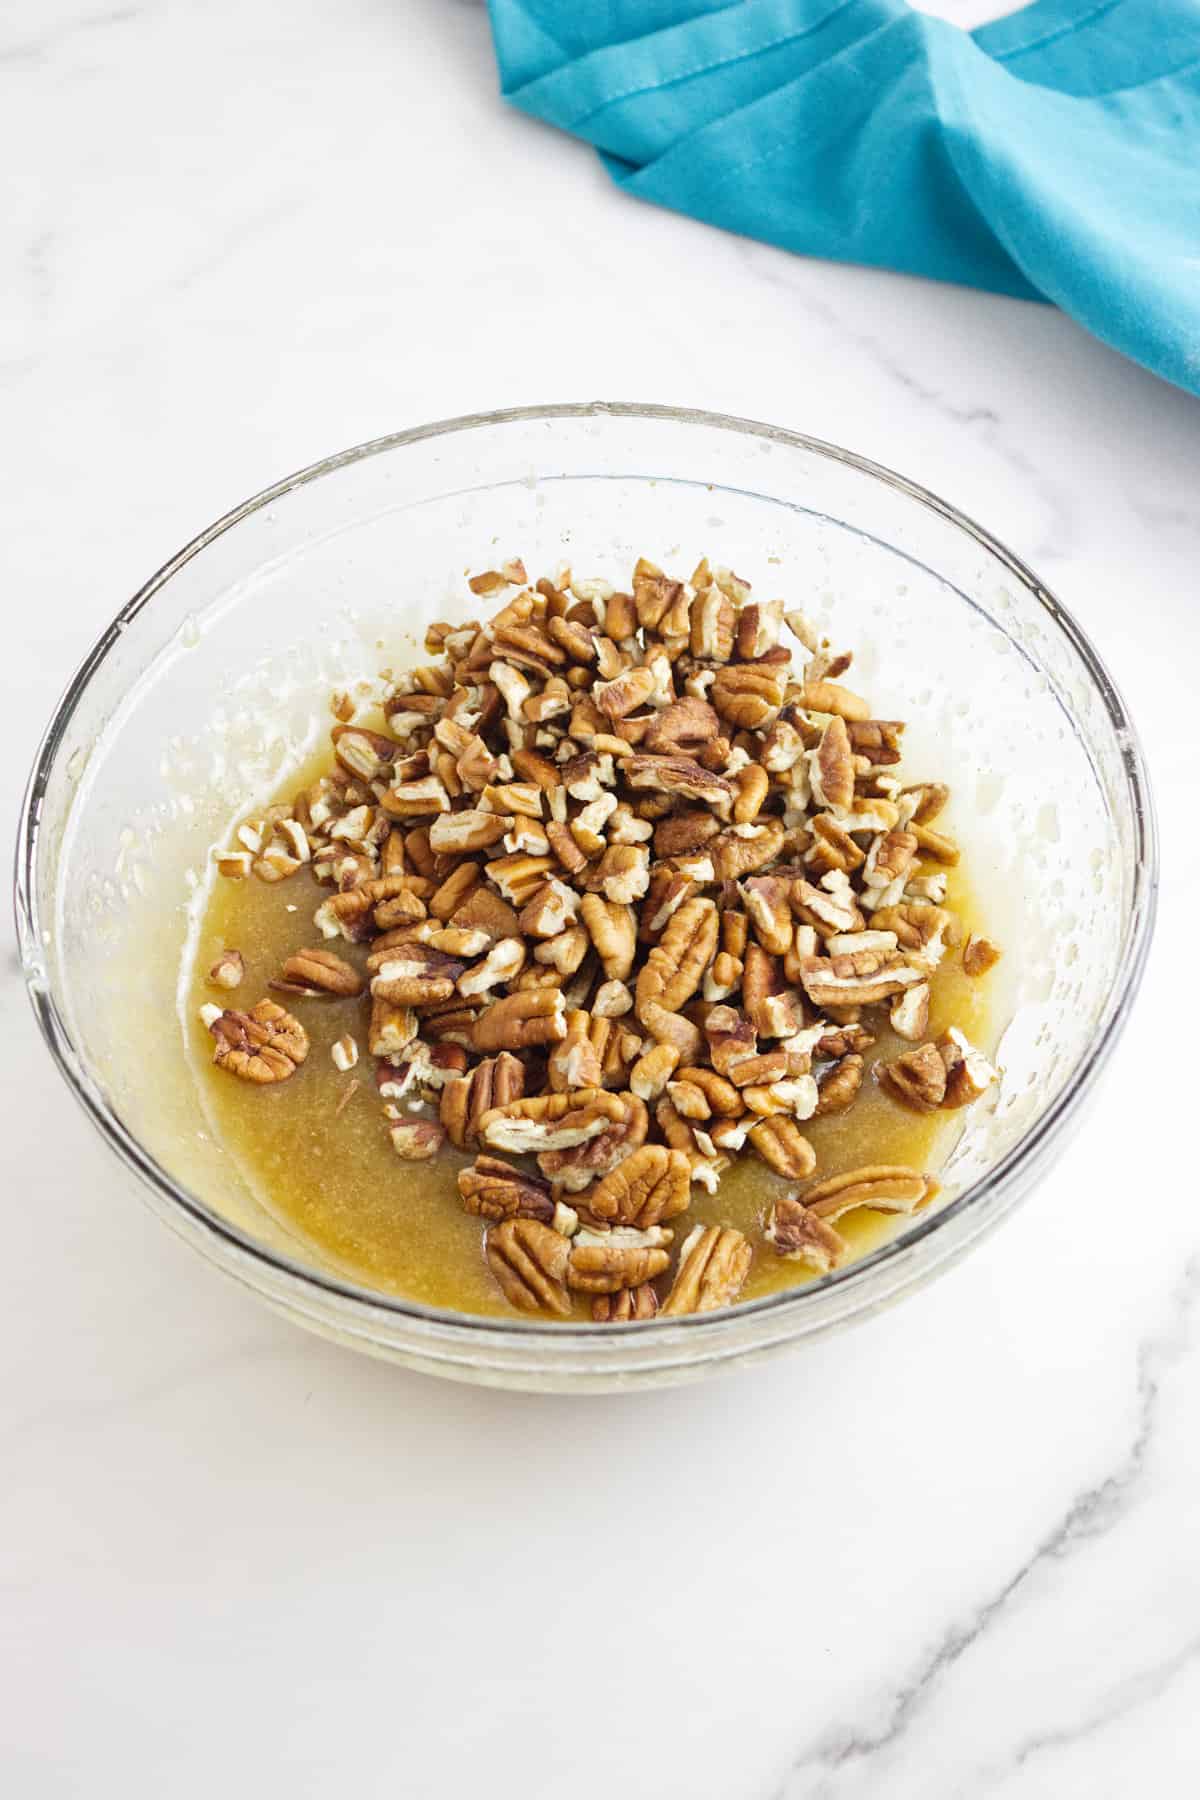 sugar and pecans in a bowl.